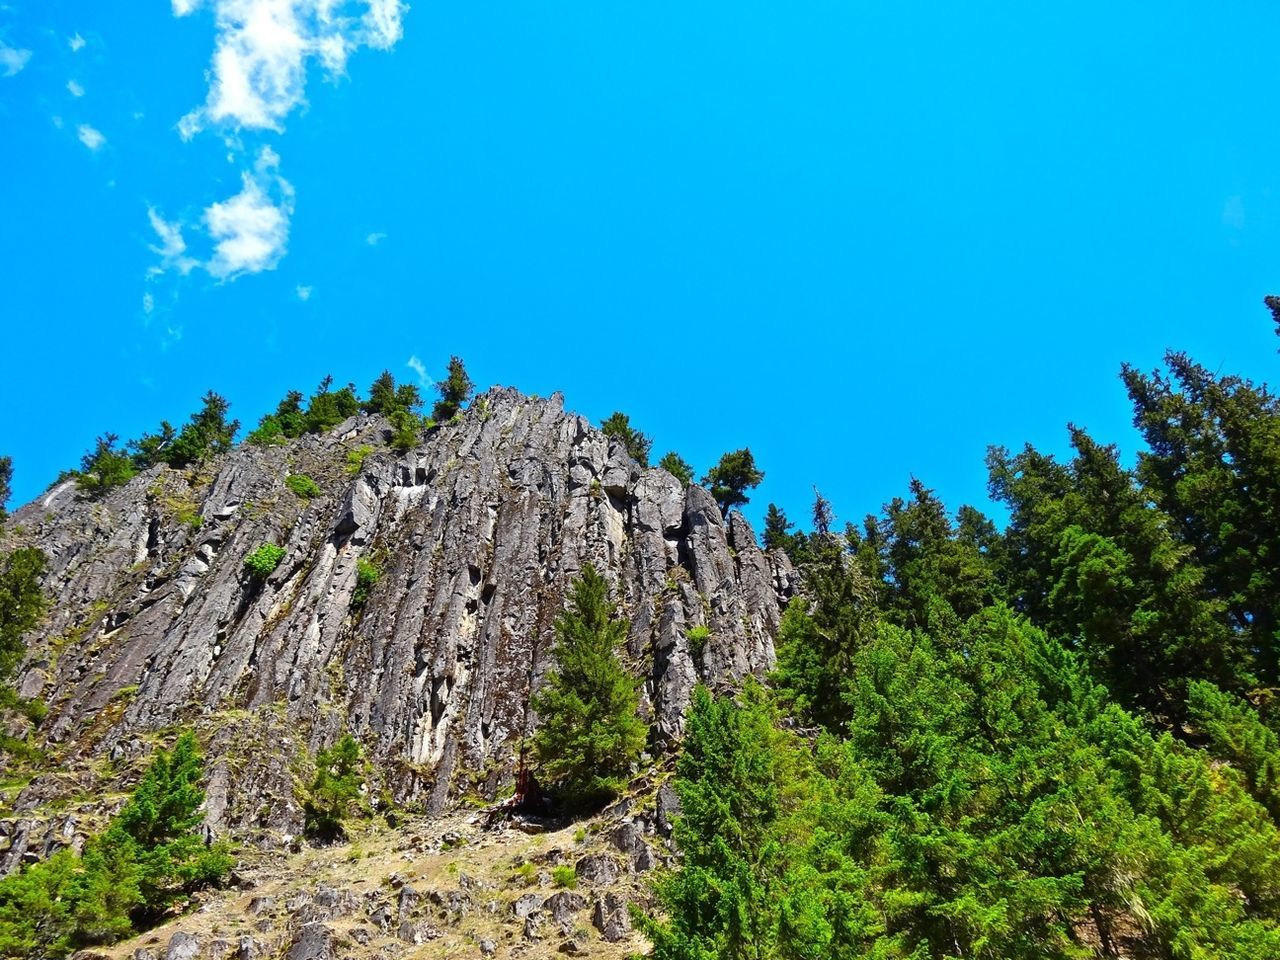 Low angle view of rocks and trees against blue sky